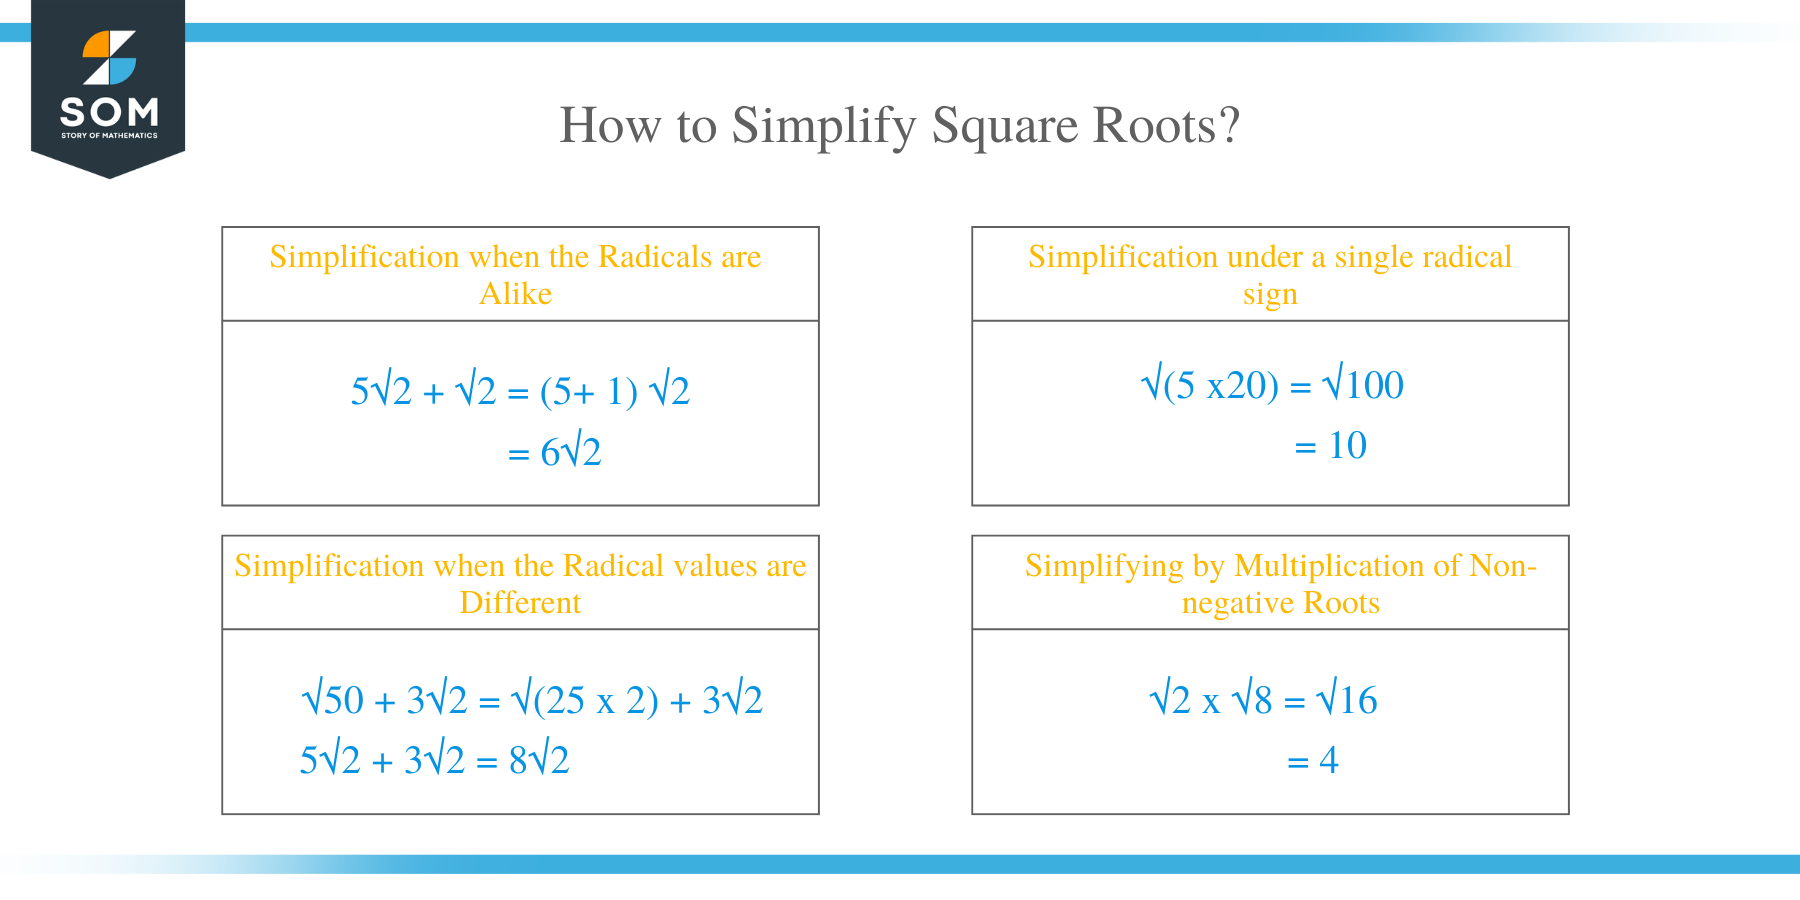 How to Simplify Square Roots?